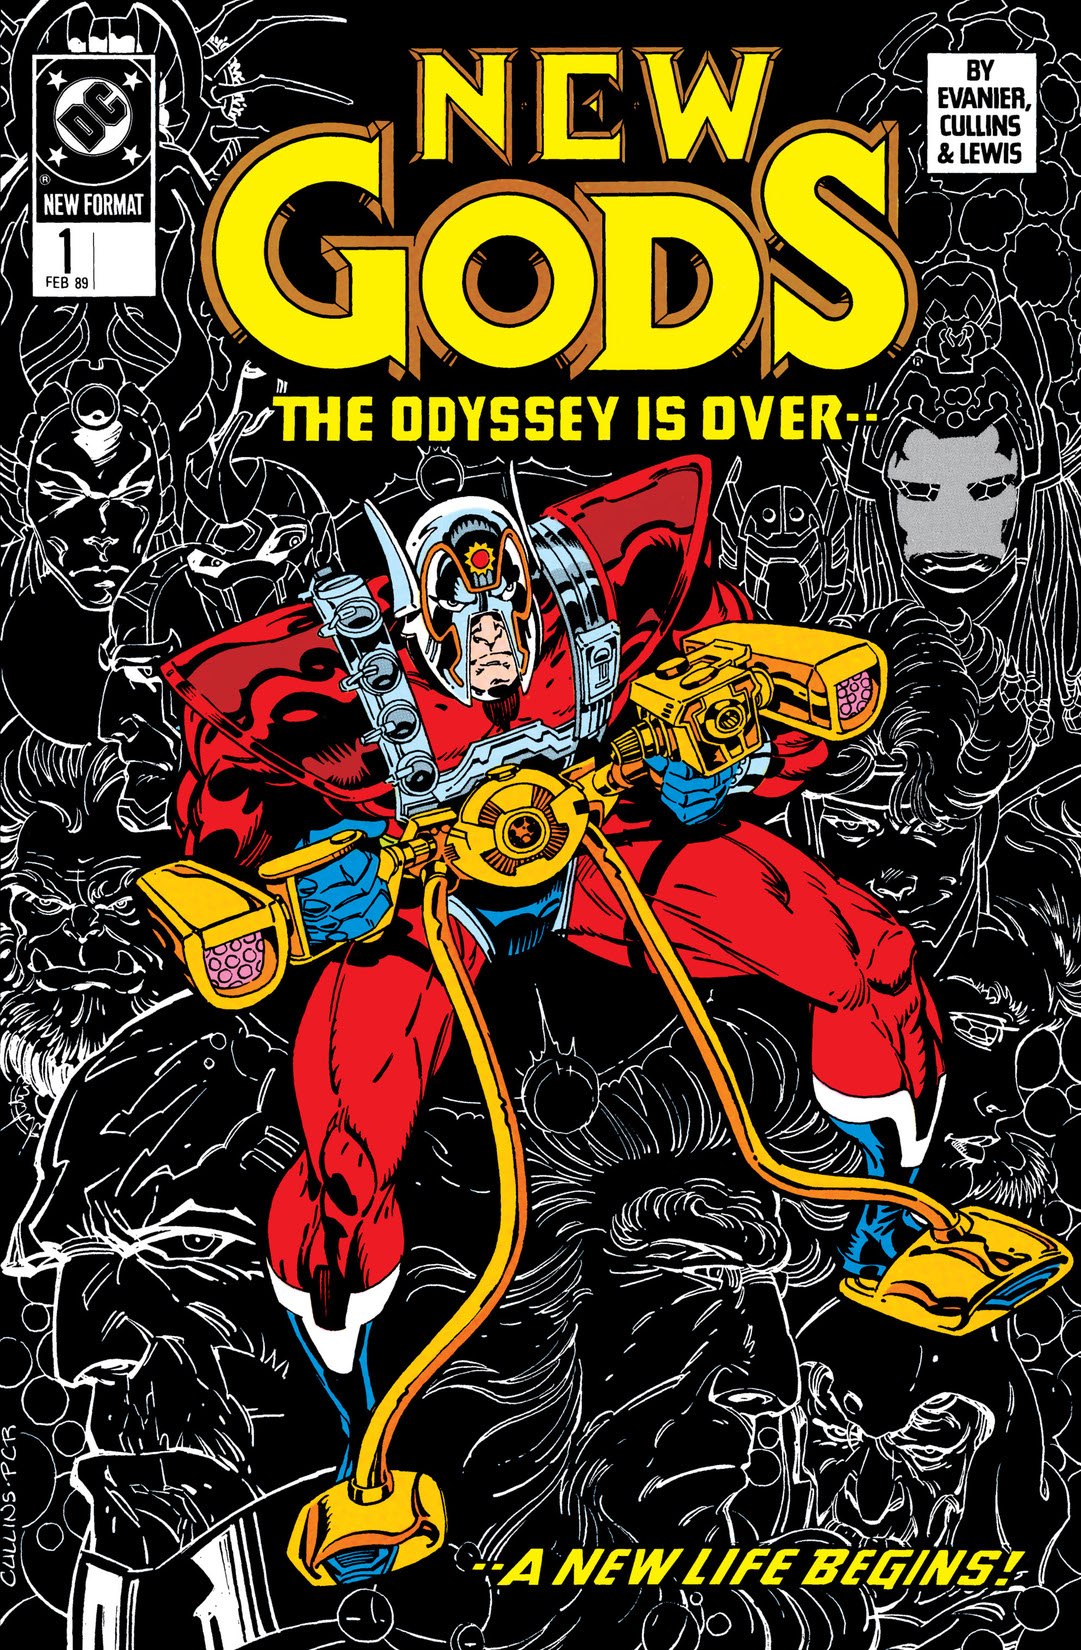 New Gods (1989-) #1 preview images